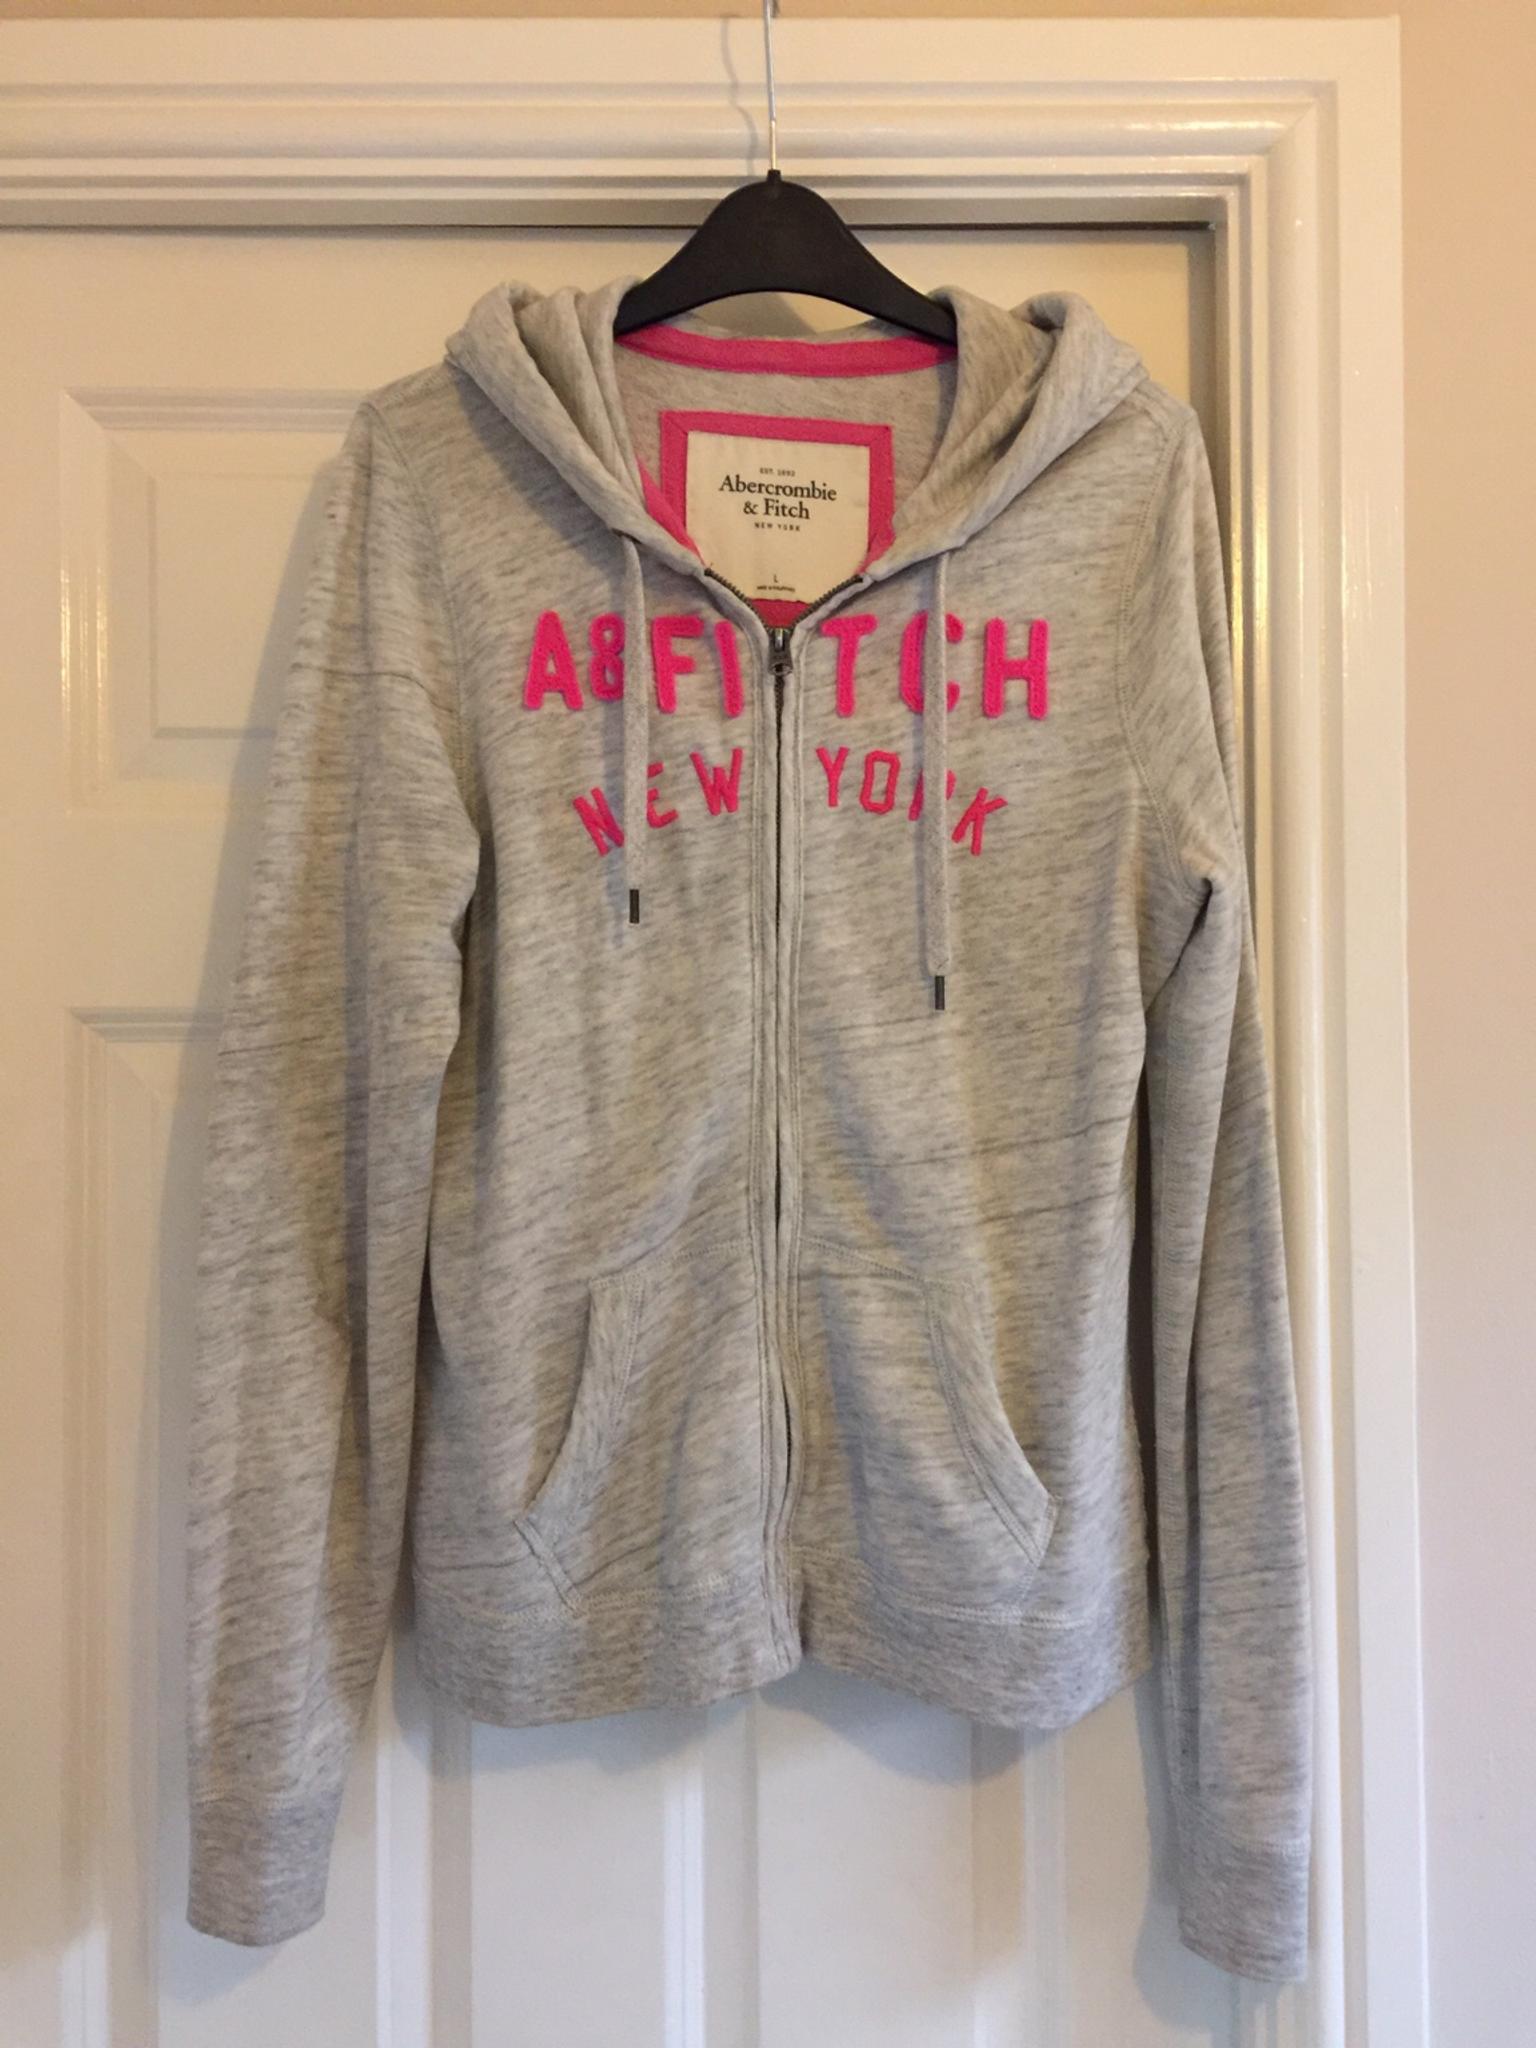 abercrombie and fitch ladies hoodie